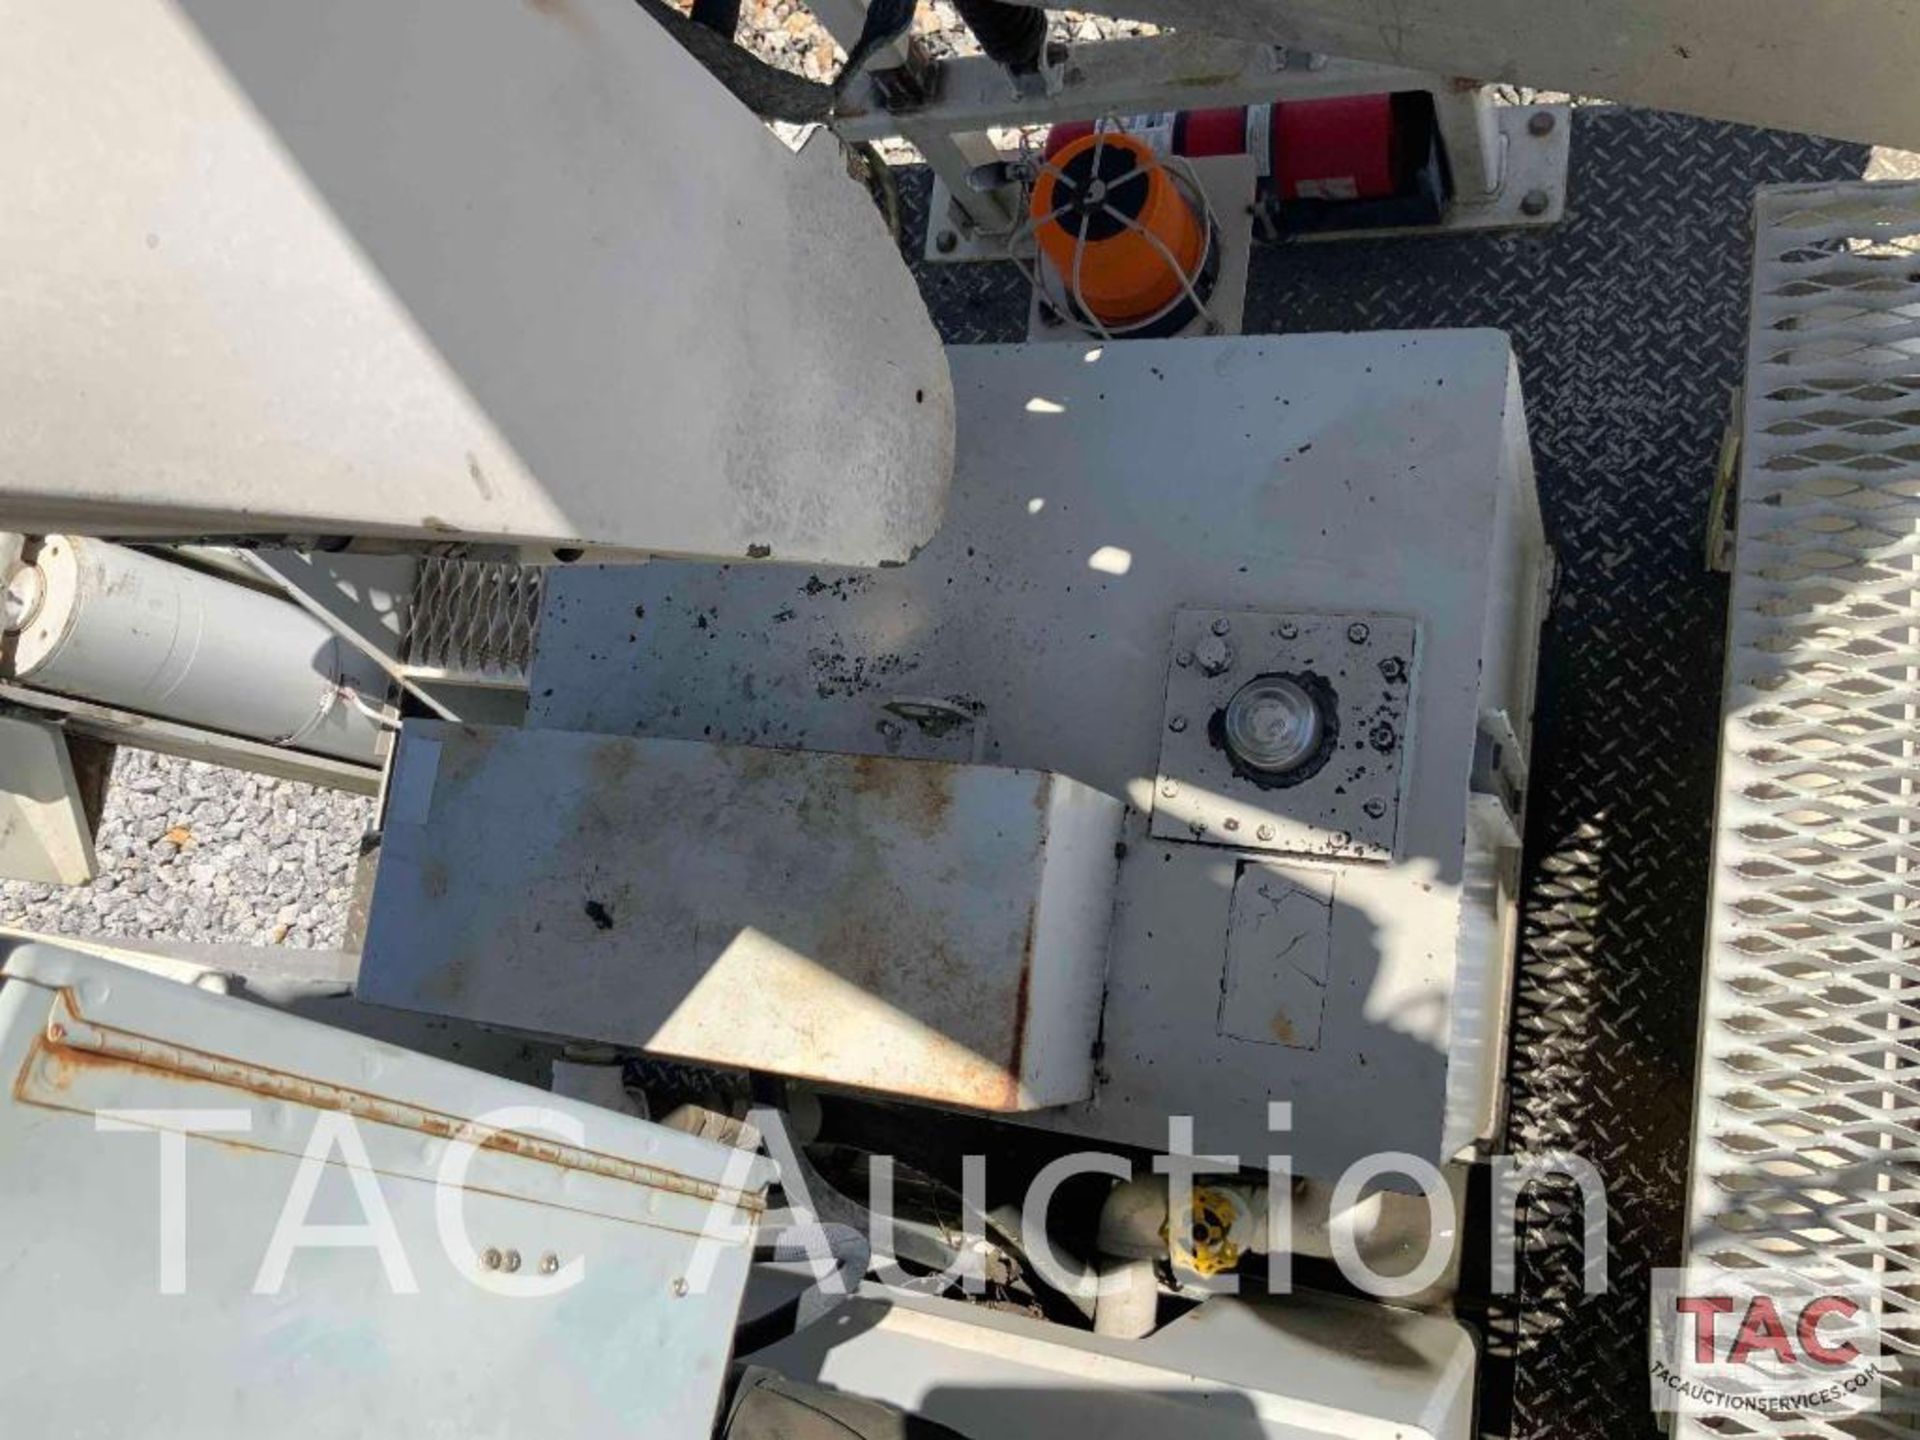 2005 ALTEC AH100 Articulating Non-Overcenter Aerial Bucket Truck Body Only - Image 39 of 69